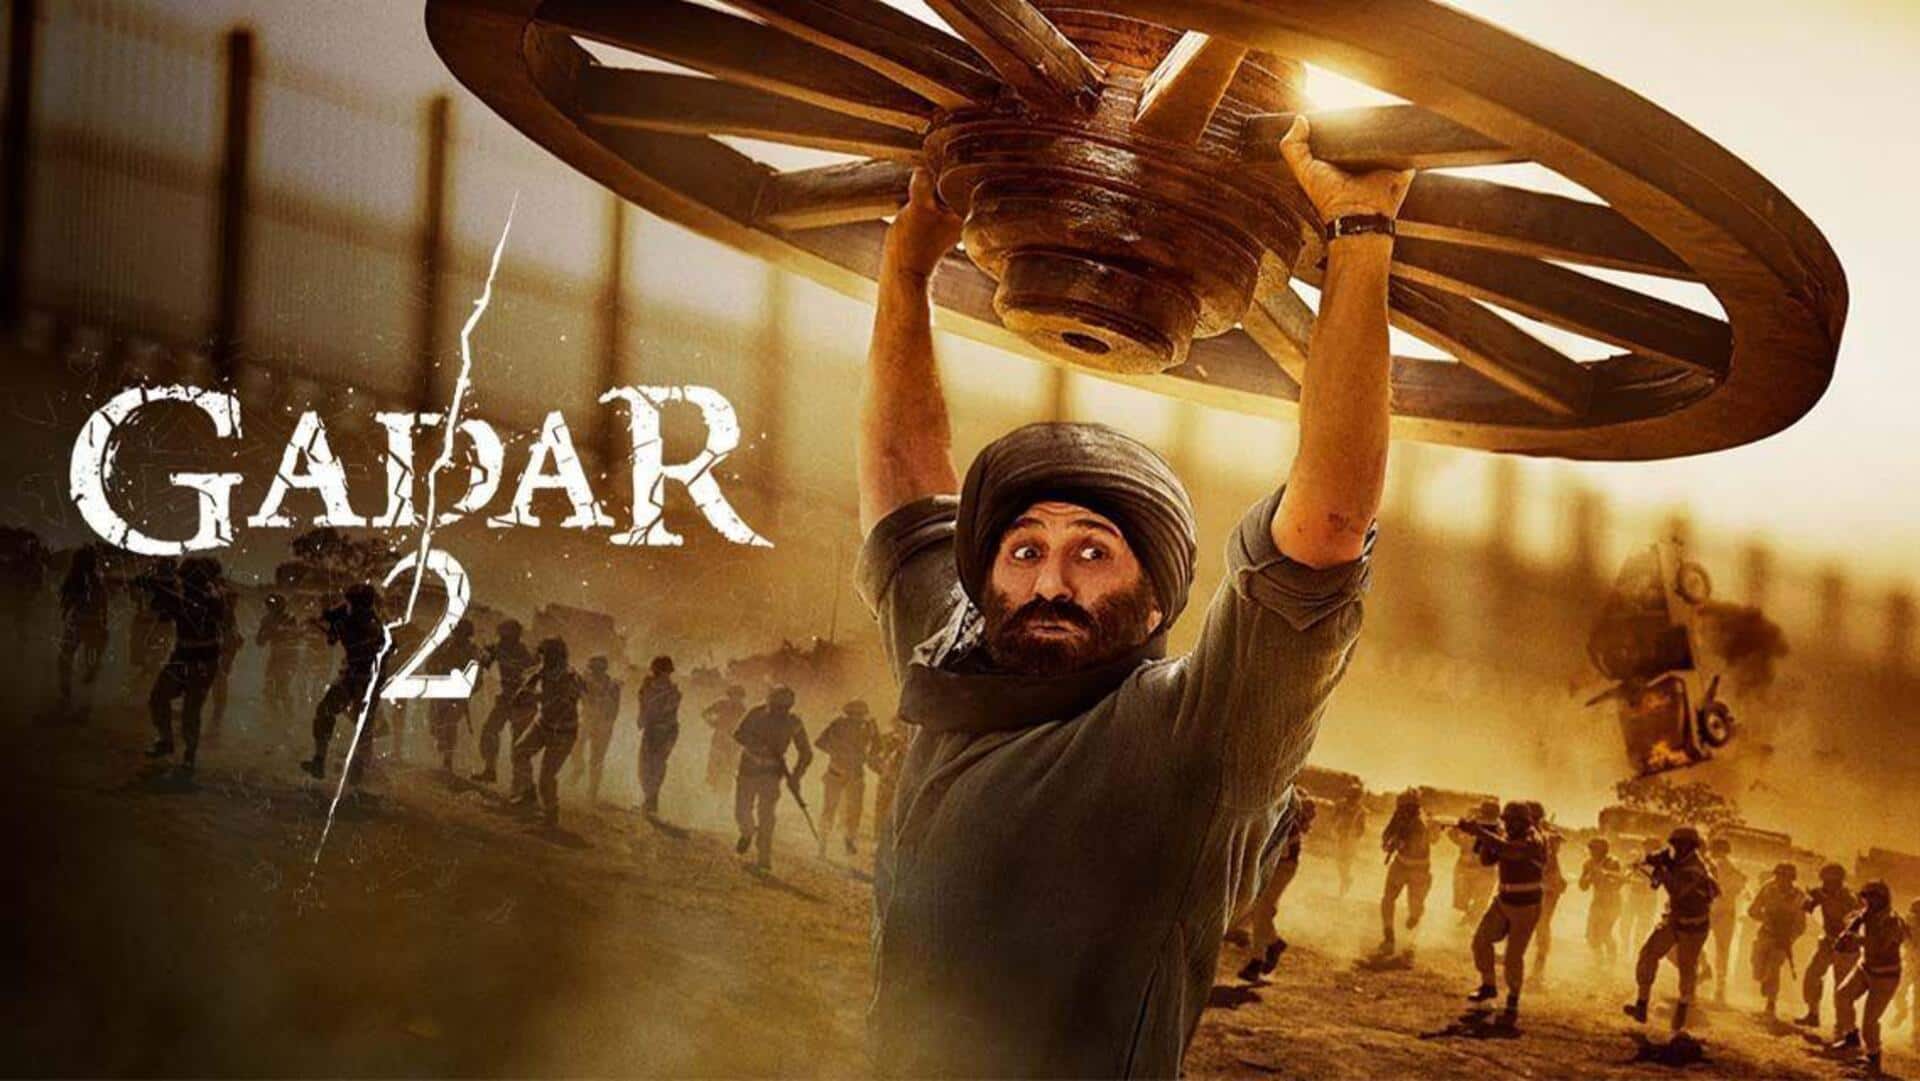 Box office collection: 'Gadar 2' shows surprising hold